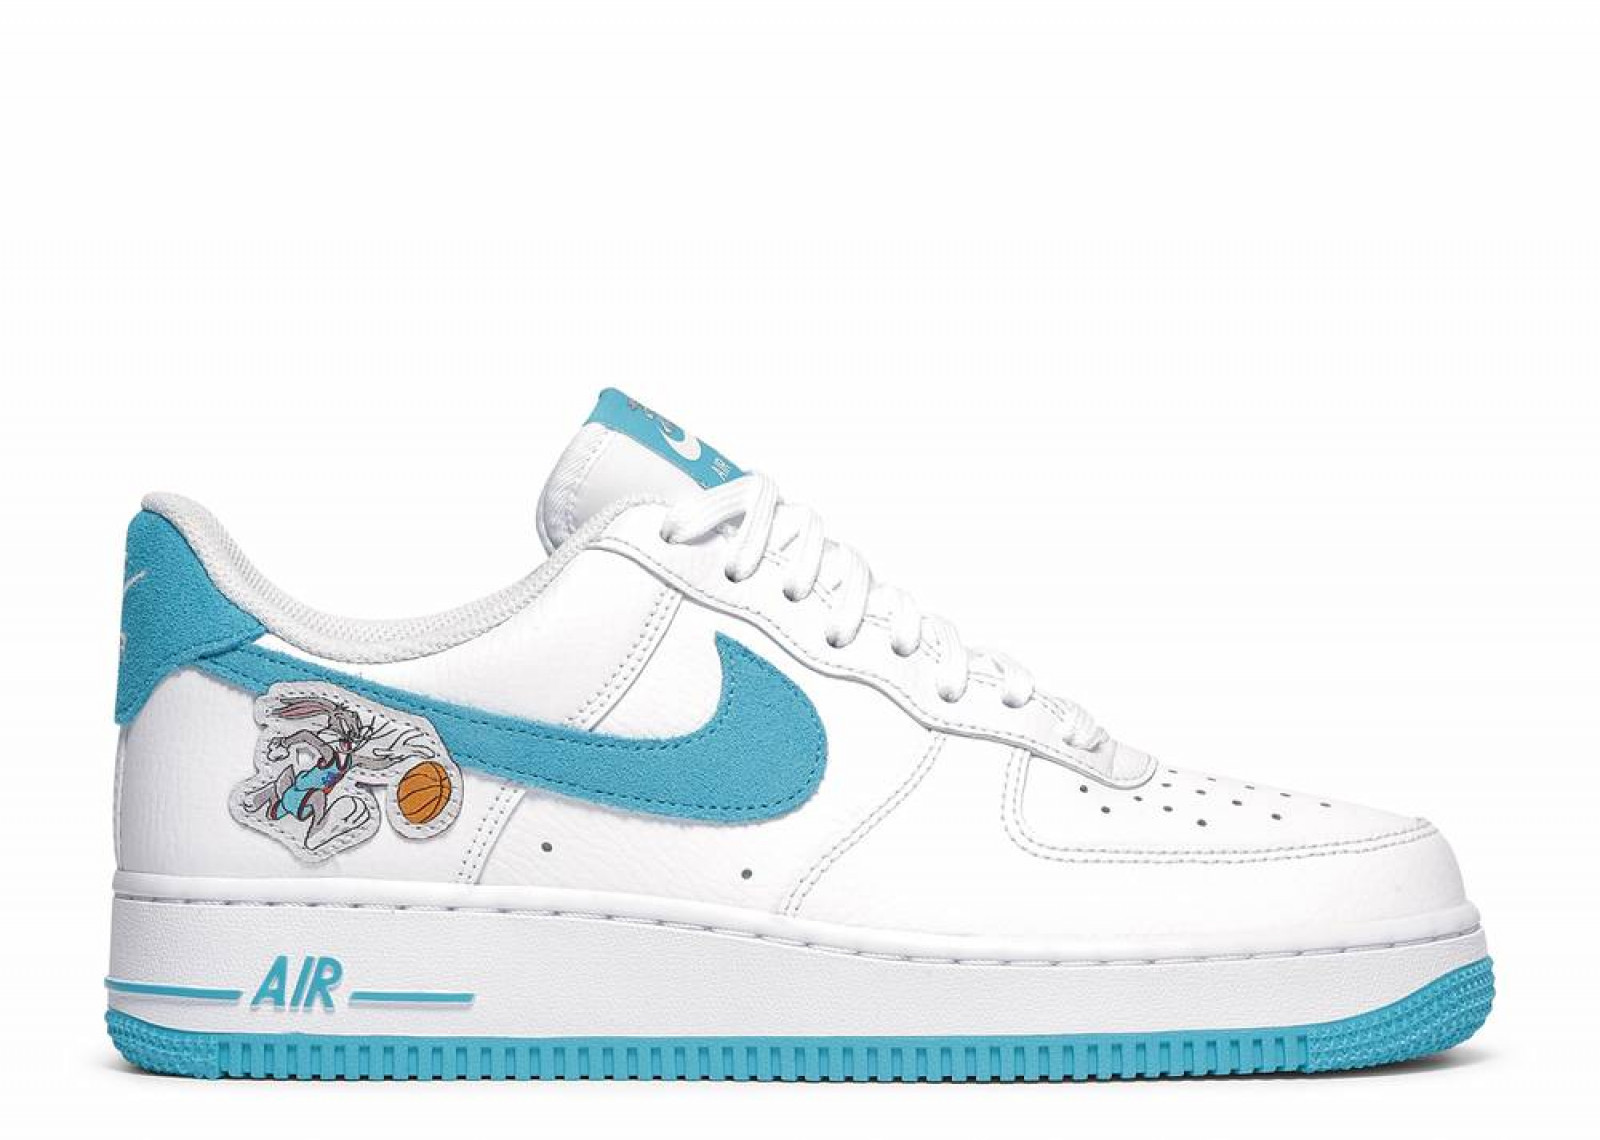 SPACE JAM X AIR FORCE 1 07 LOW HARE image 1